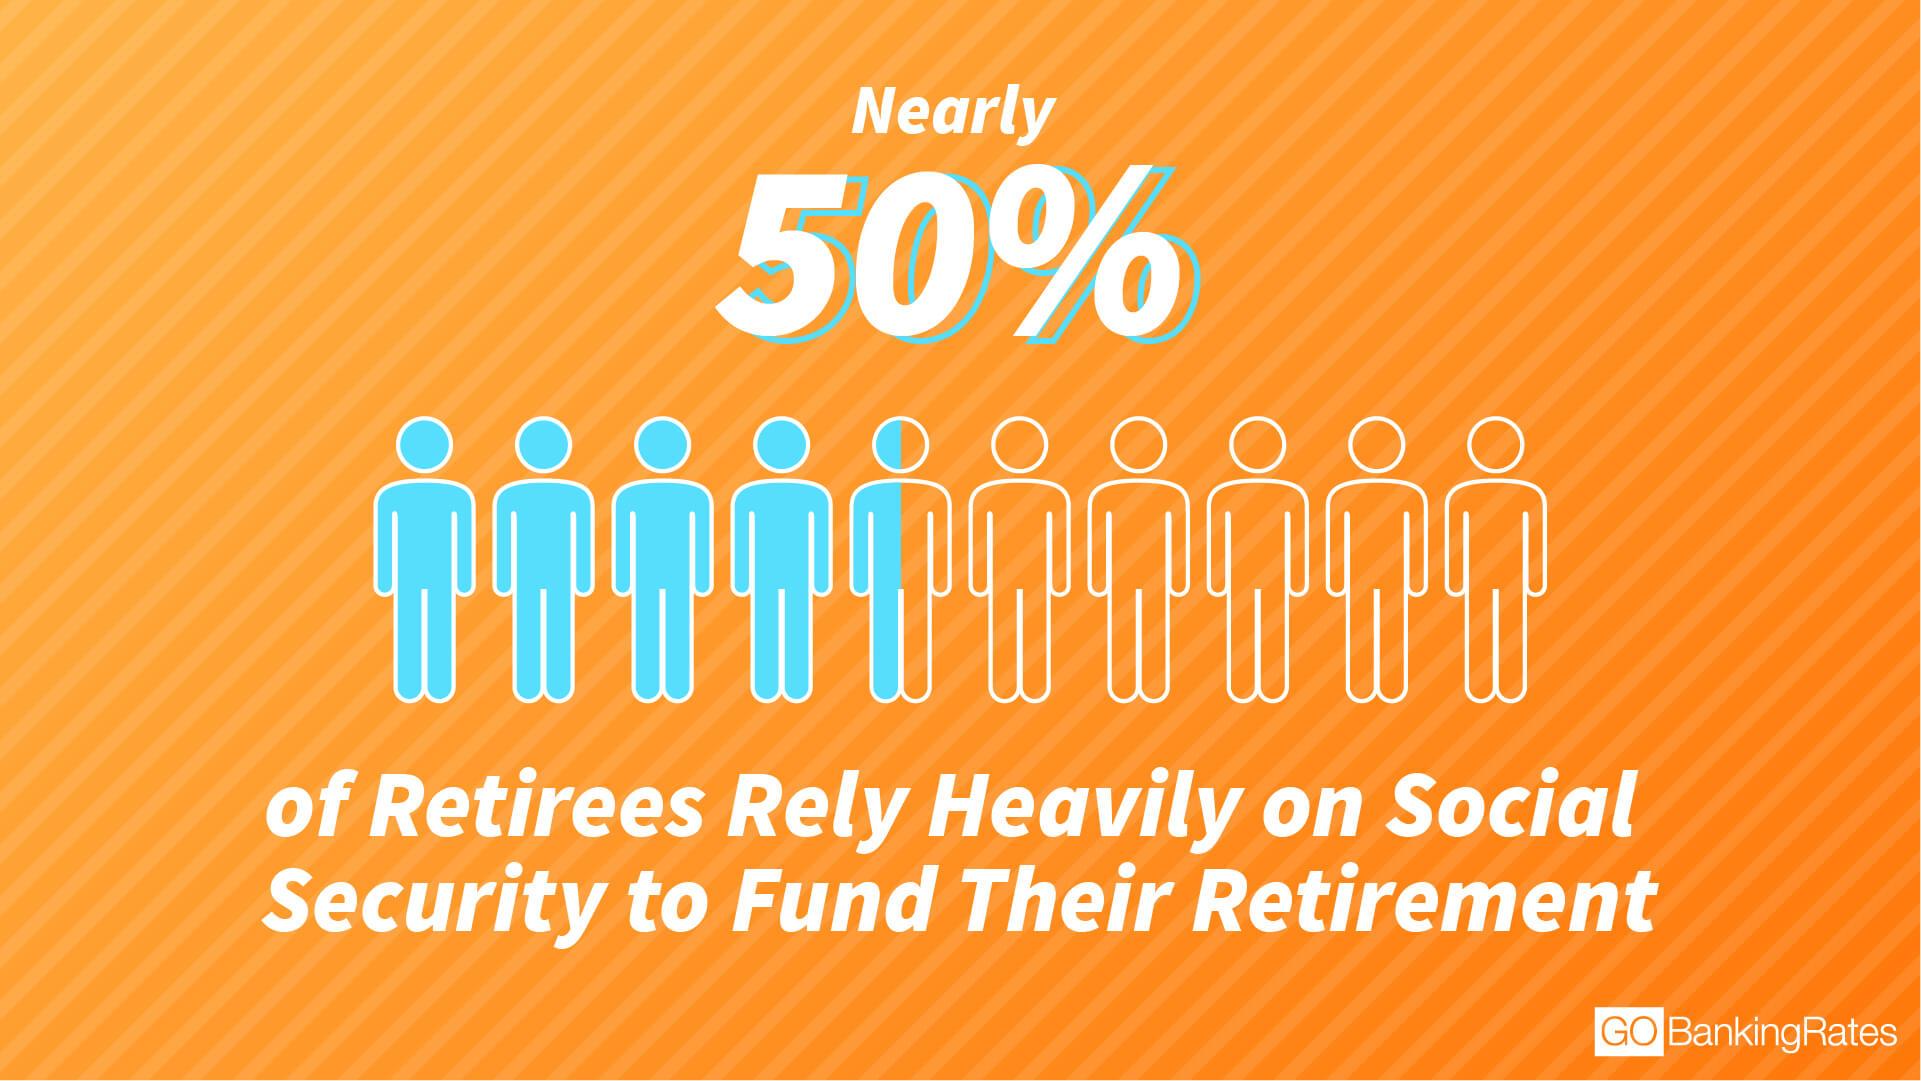 50% of retirees rely heavily on social security income